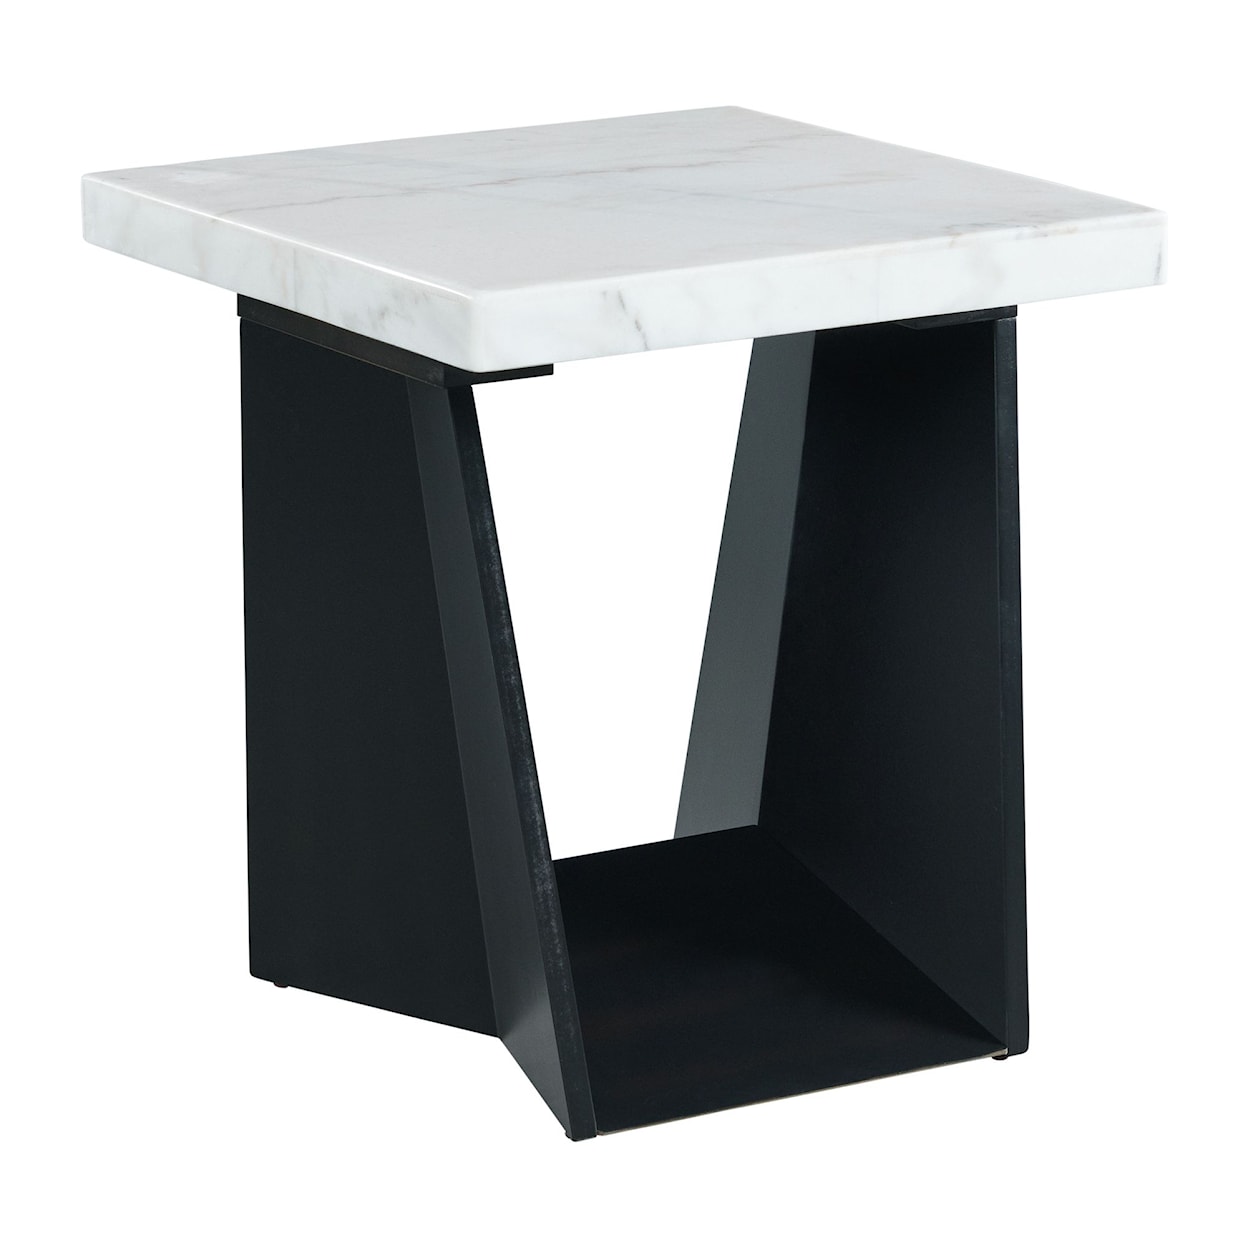 Elements International Beckley BECKY WHITE END TABLE |